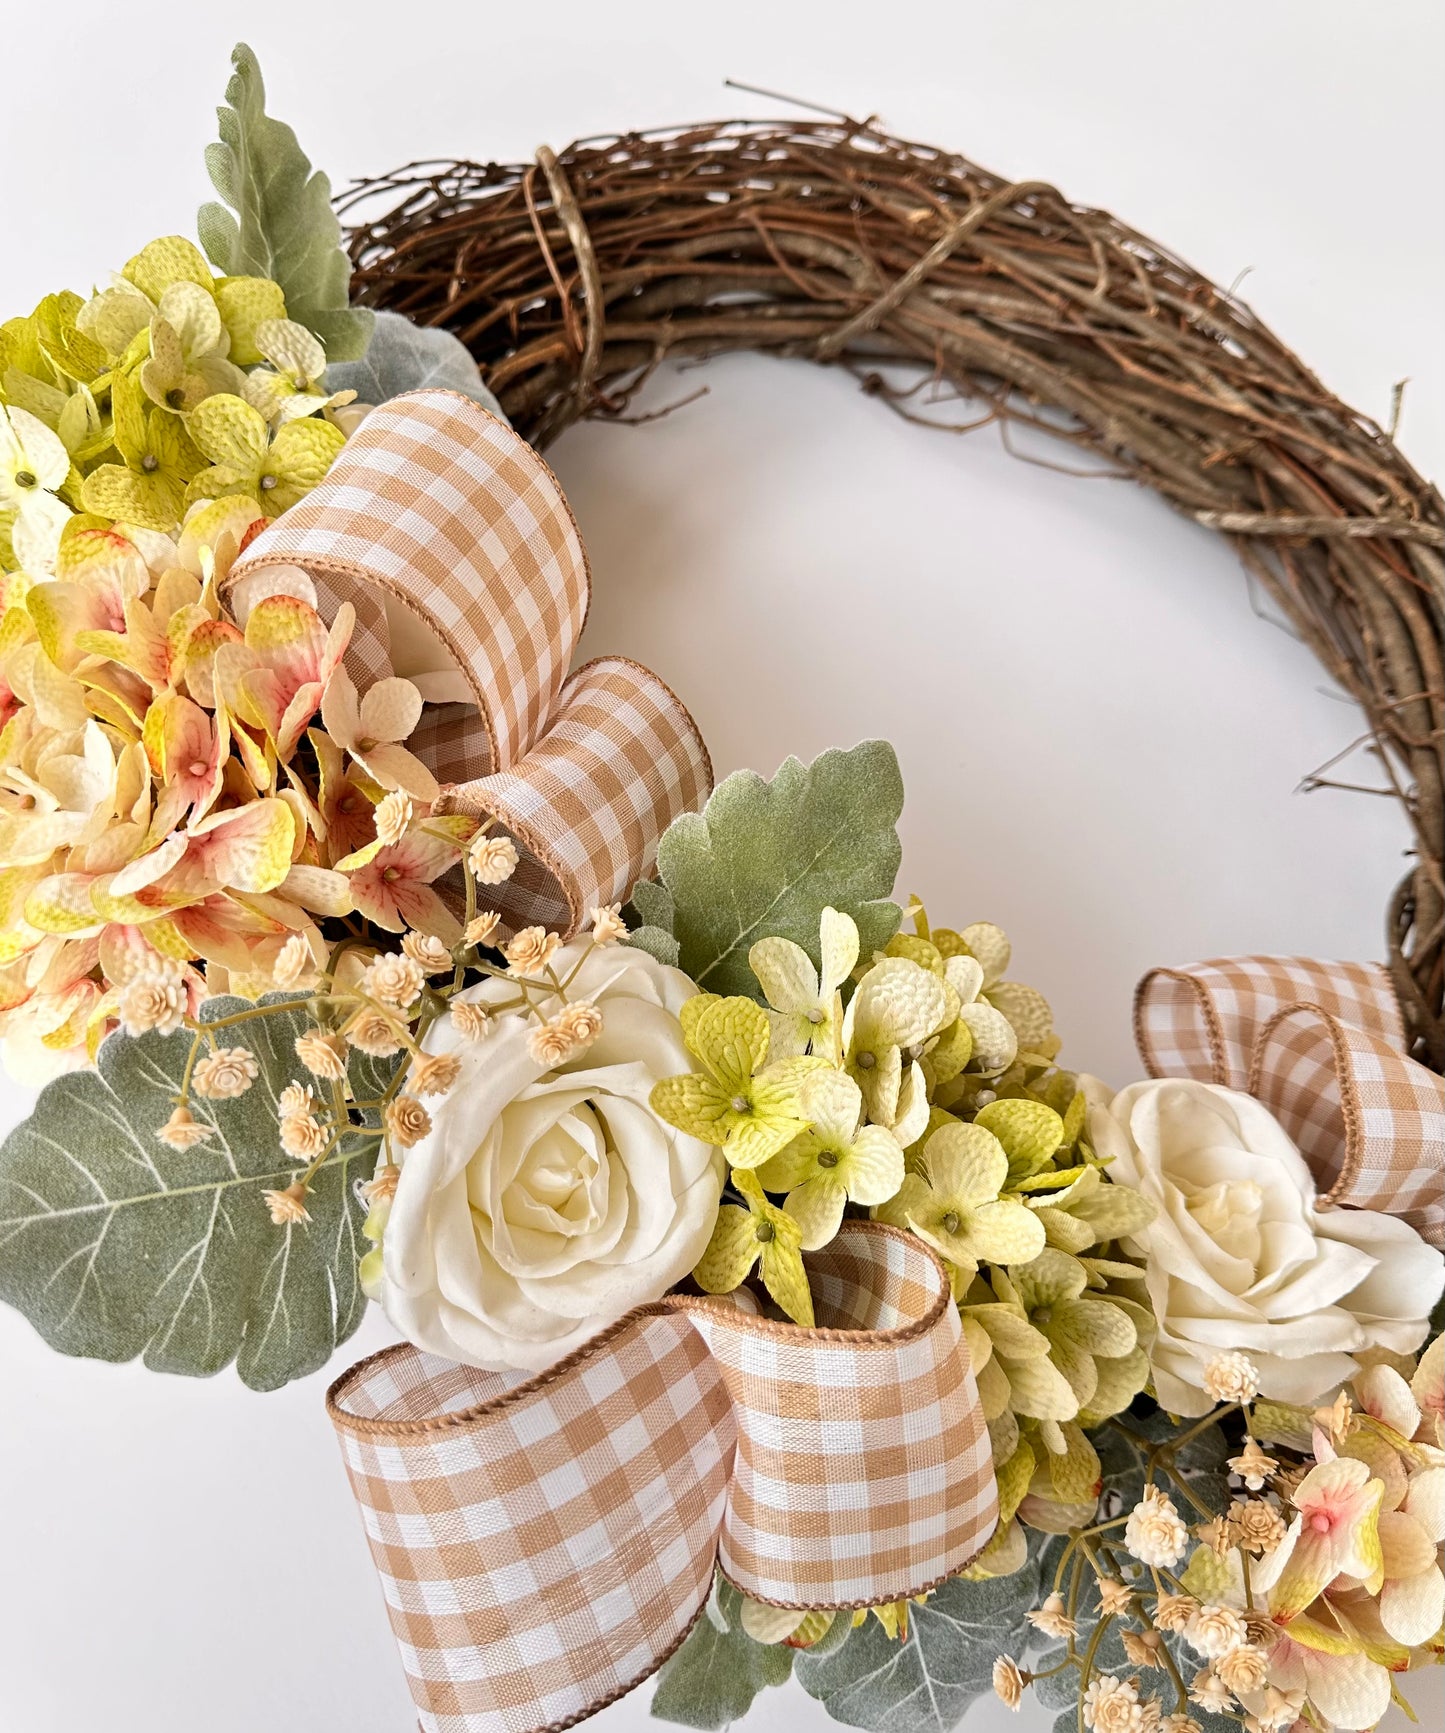 18 in. Vine Wreath with Artificial Soft Toned Hydrangeas and White Roses, with Checkered Ribbon